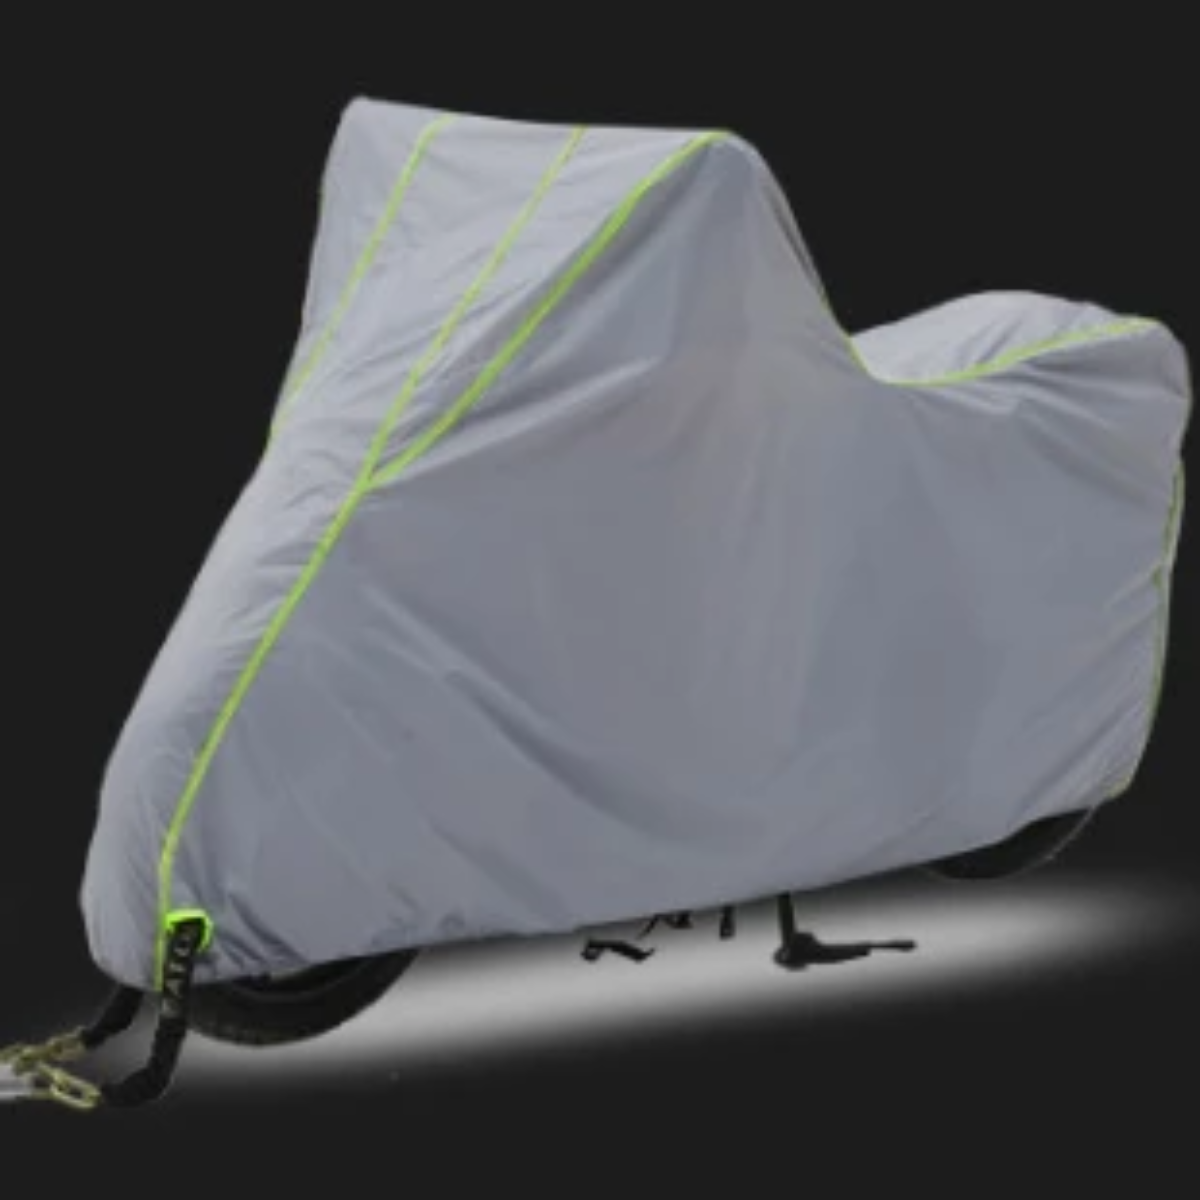 Motorcycle Outdoor Protective Cover - American Legend Rider